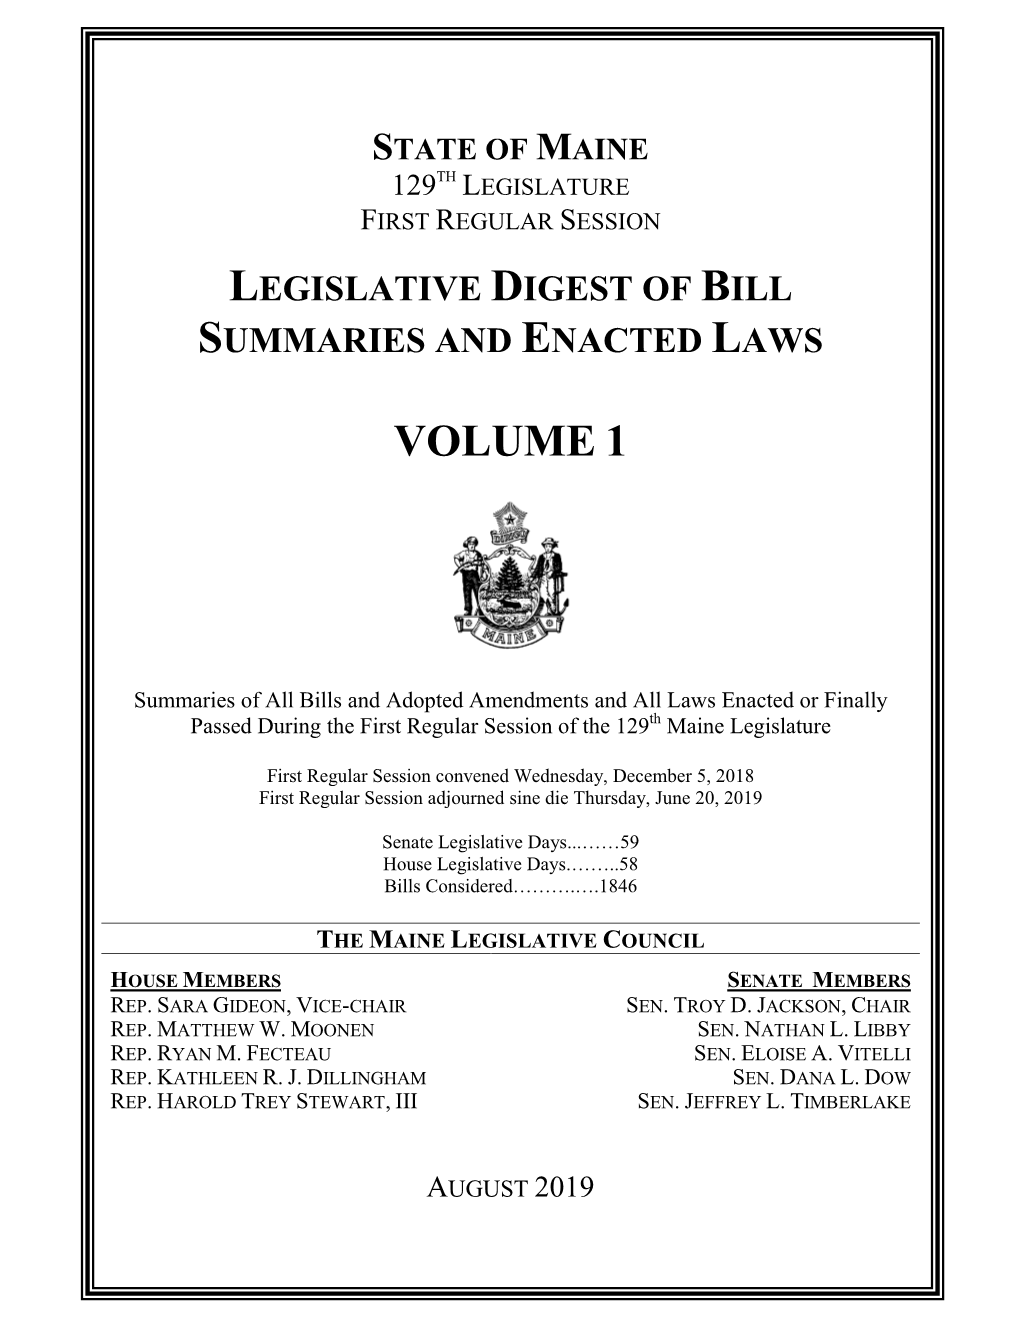 Enacted Law Digest Cover